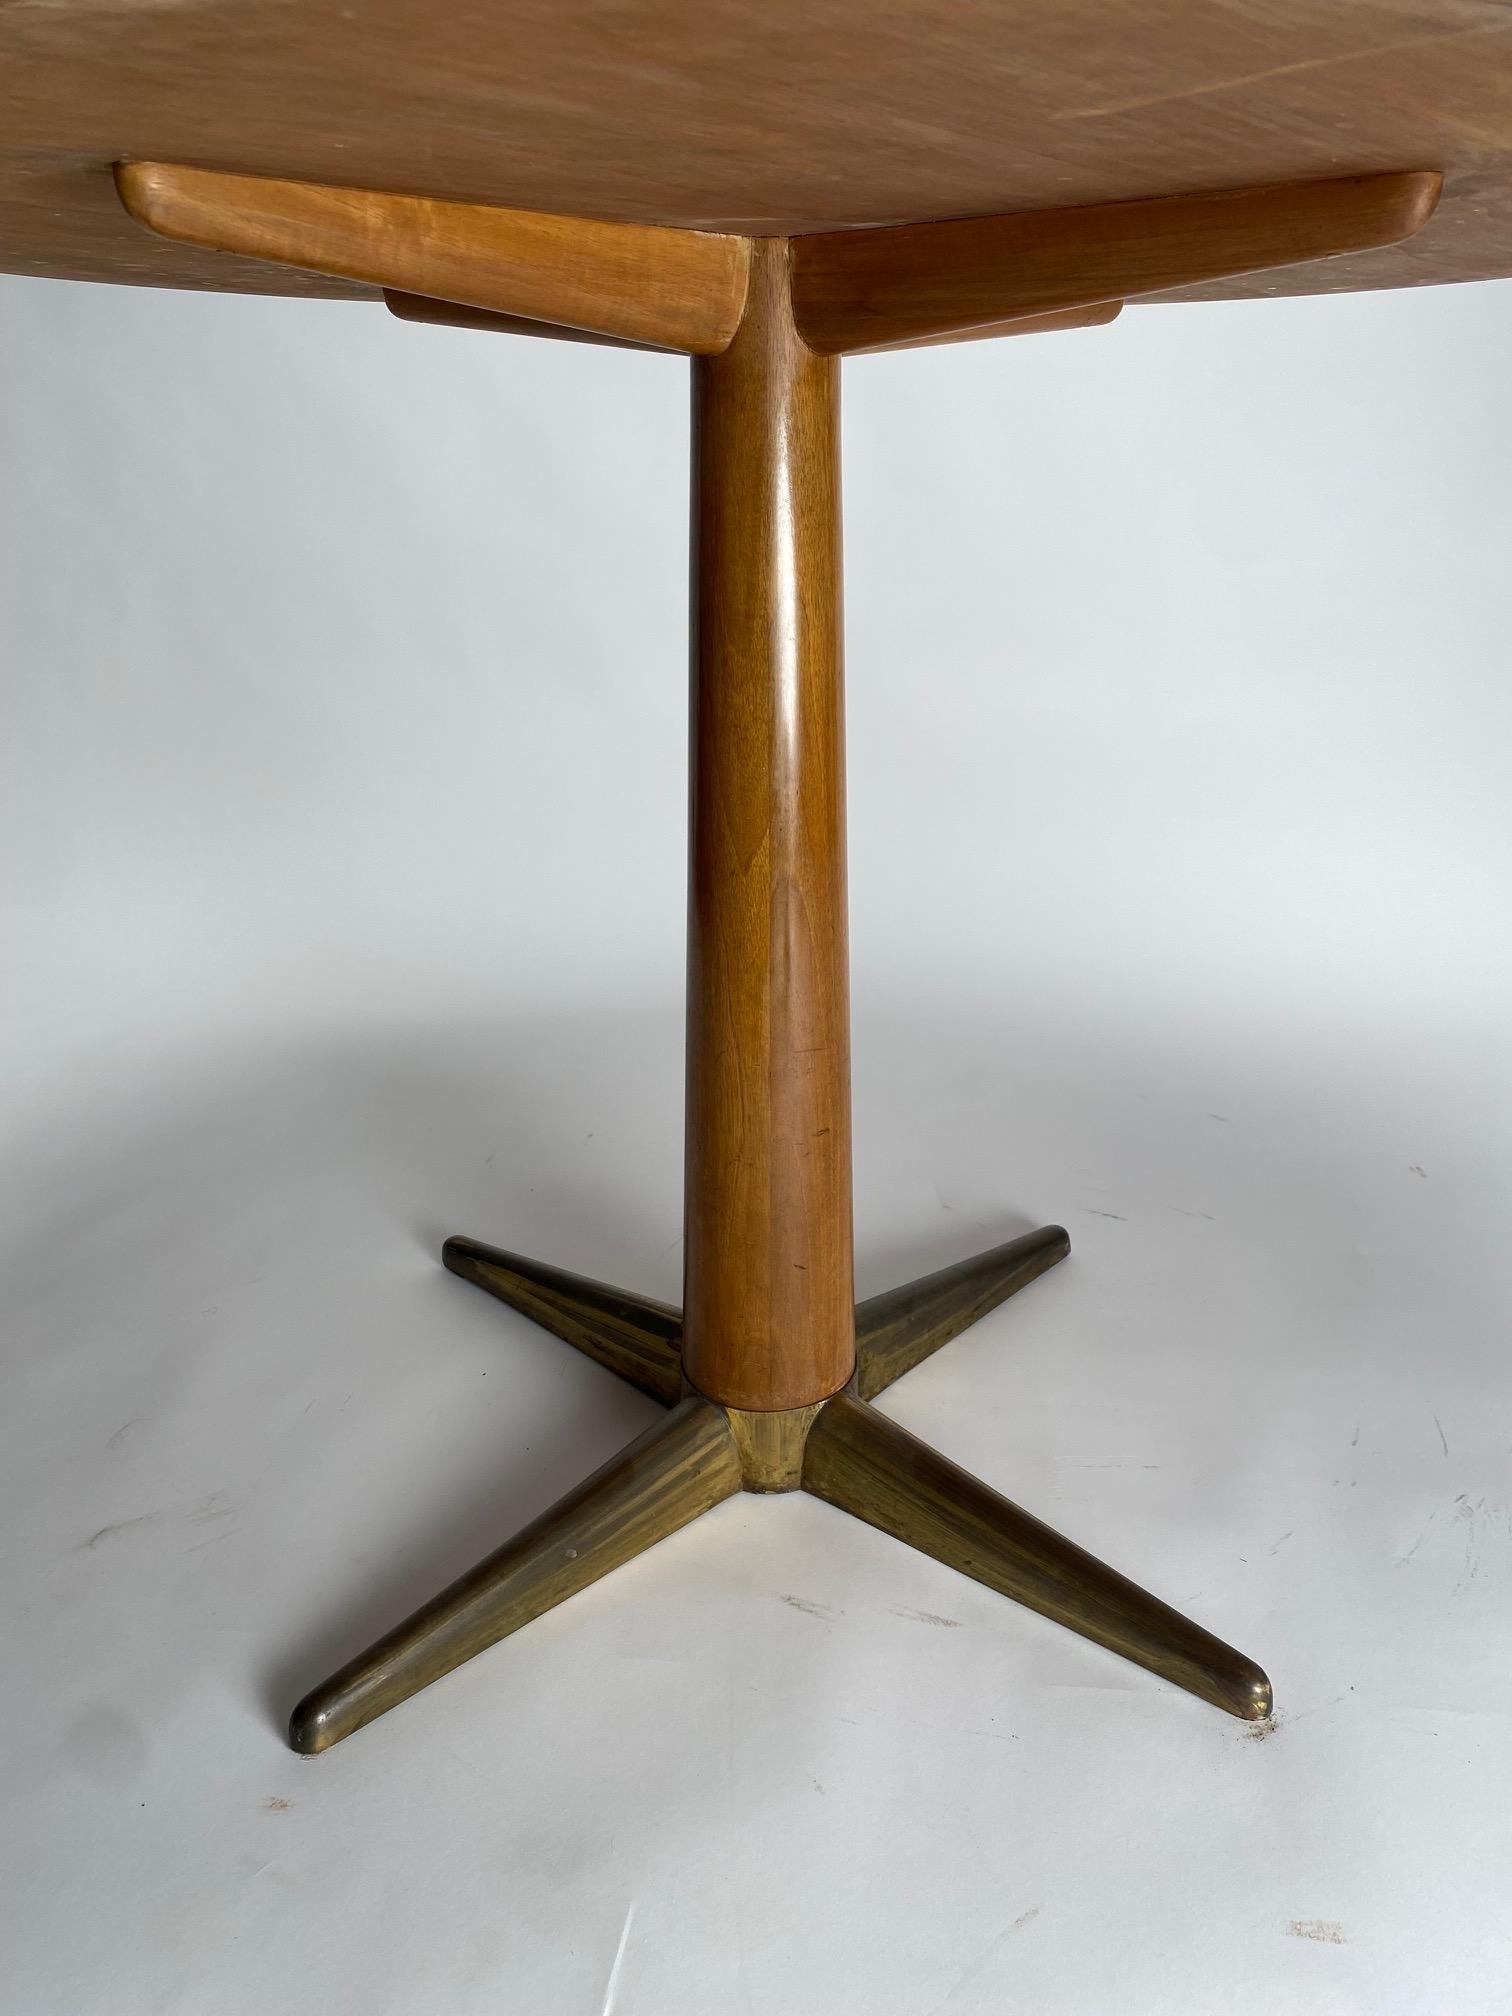 Mid-20th Century Mid-Century Round Table in wood and brass, Gio Ponti Style, Italy 1950s For Sale